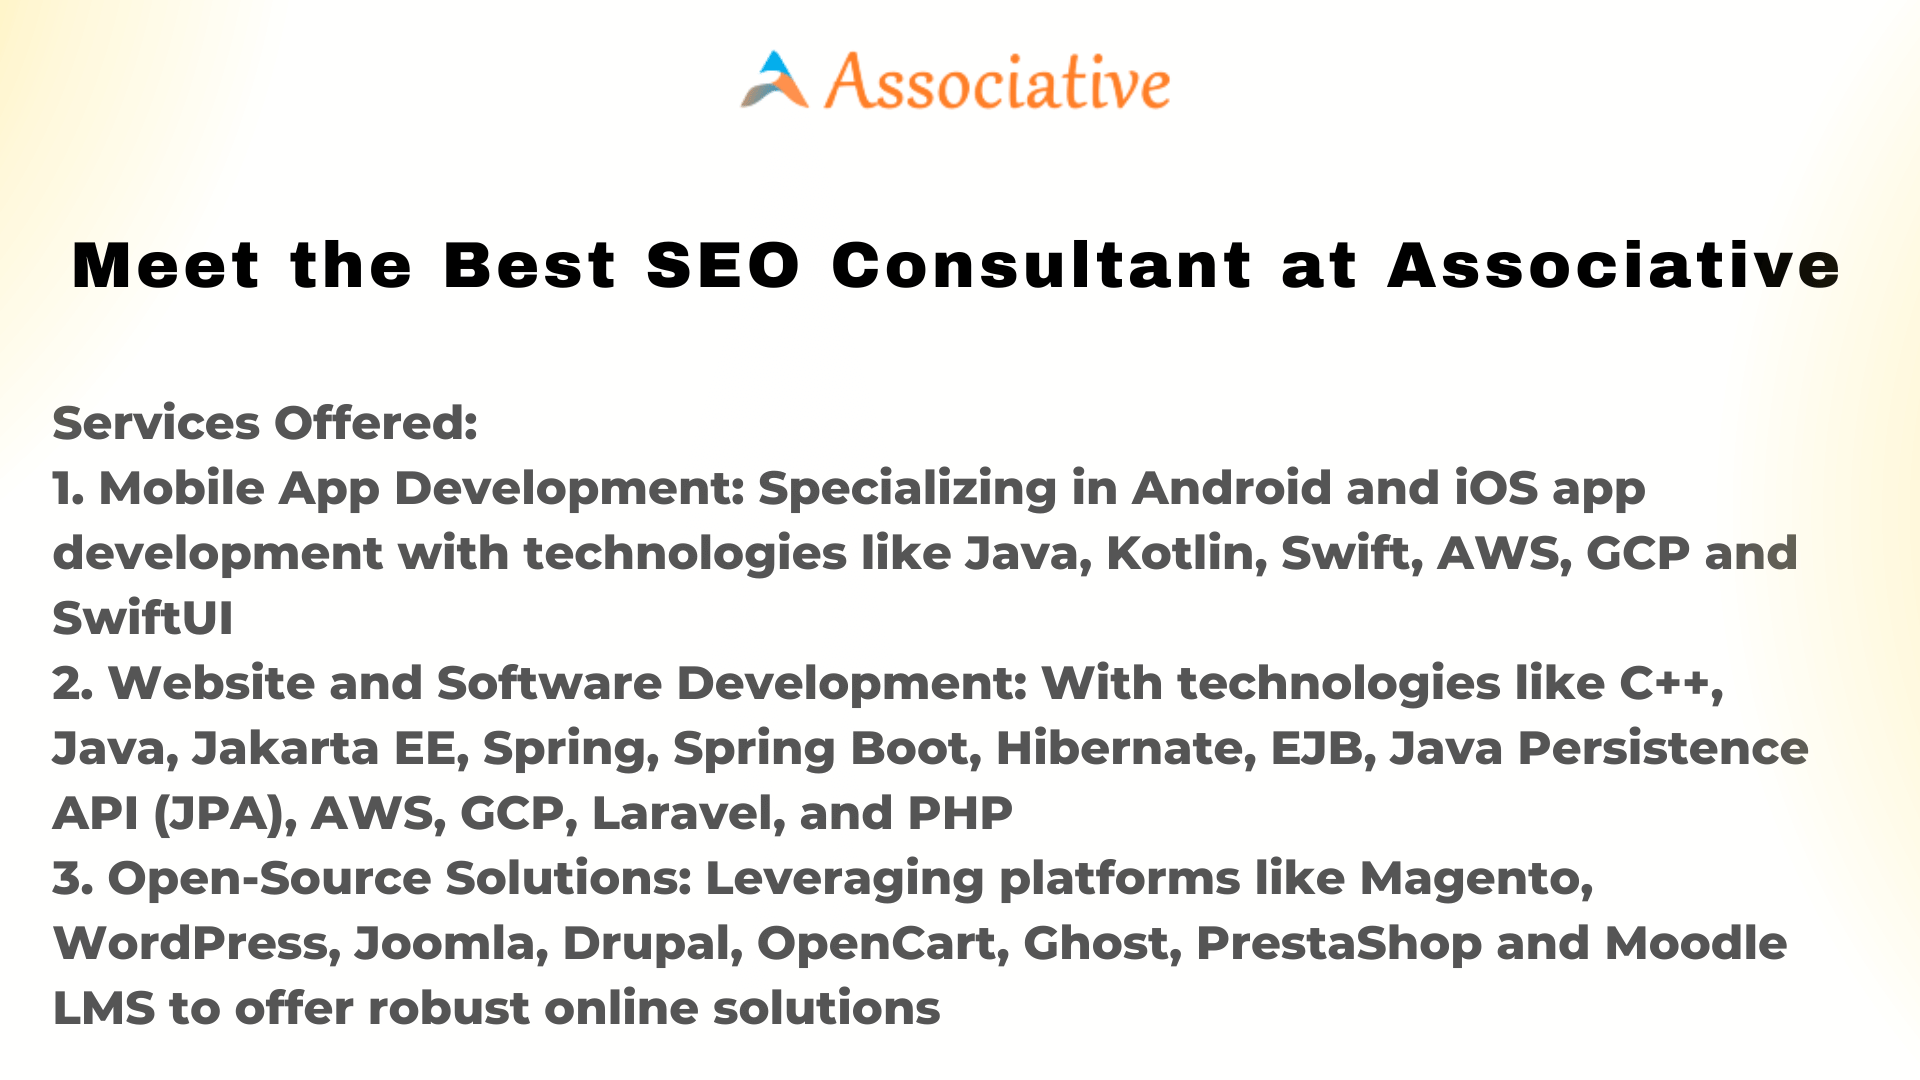 Meet the Best SEO Consultant at Associative